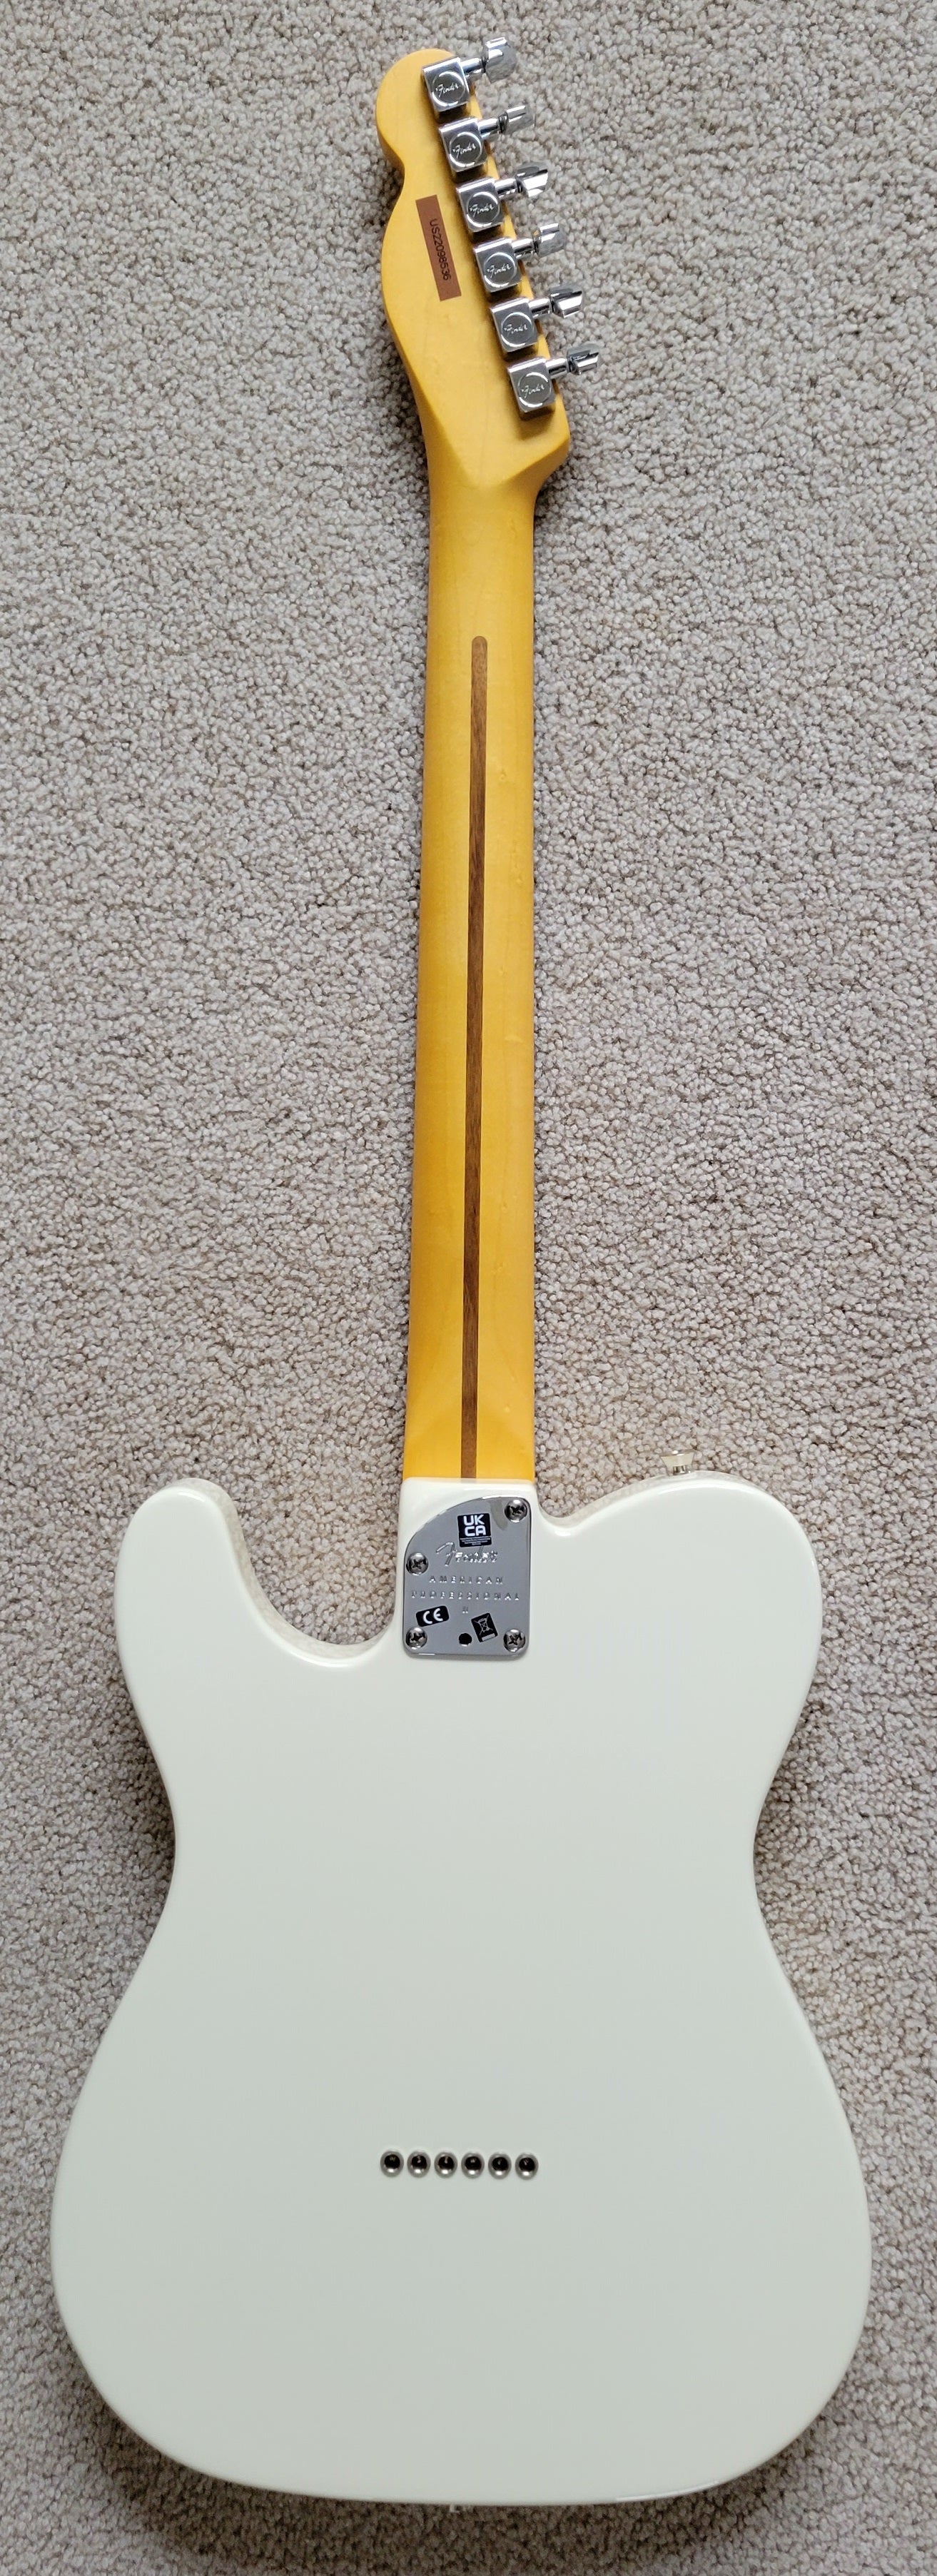 Fender American Professional II Telecaster Electric Guitar, Olympic White - Deluxe Molded Case